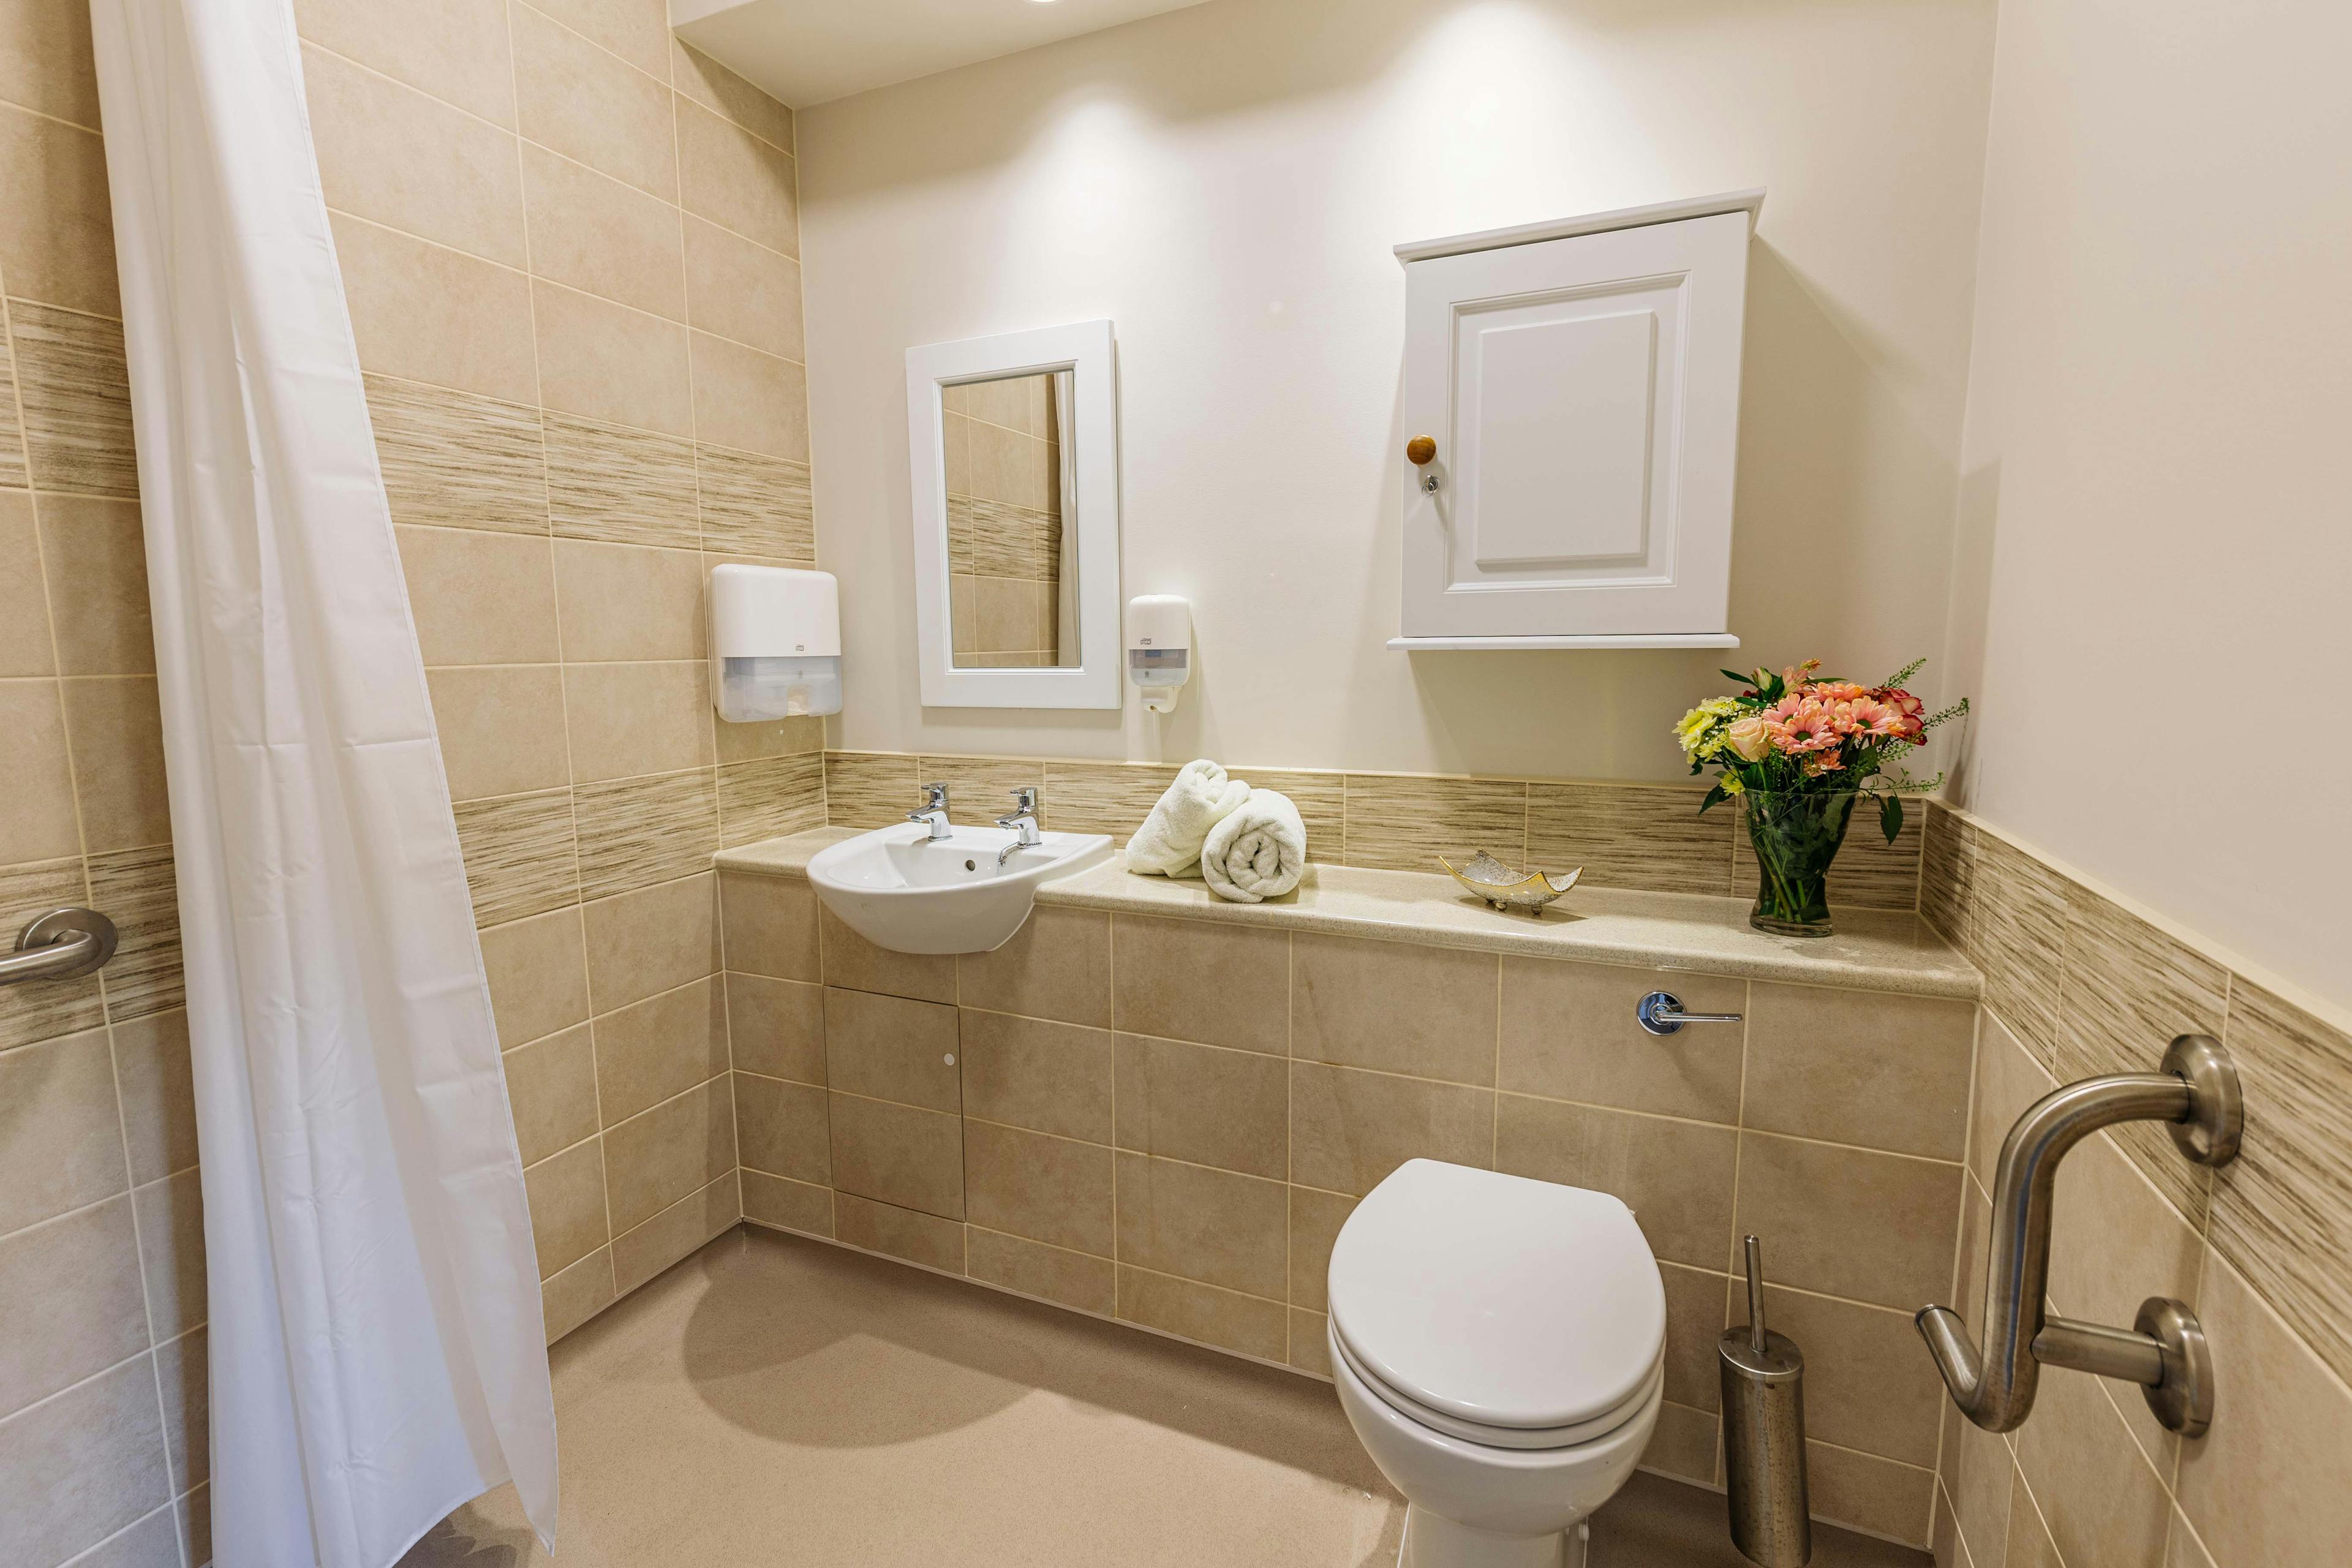 Bathroom at Worplesdon View Care Home in Guildford, Surrey